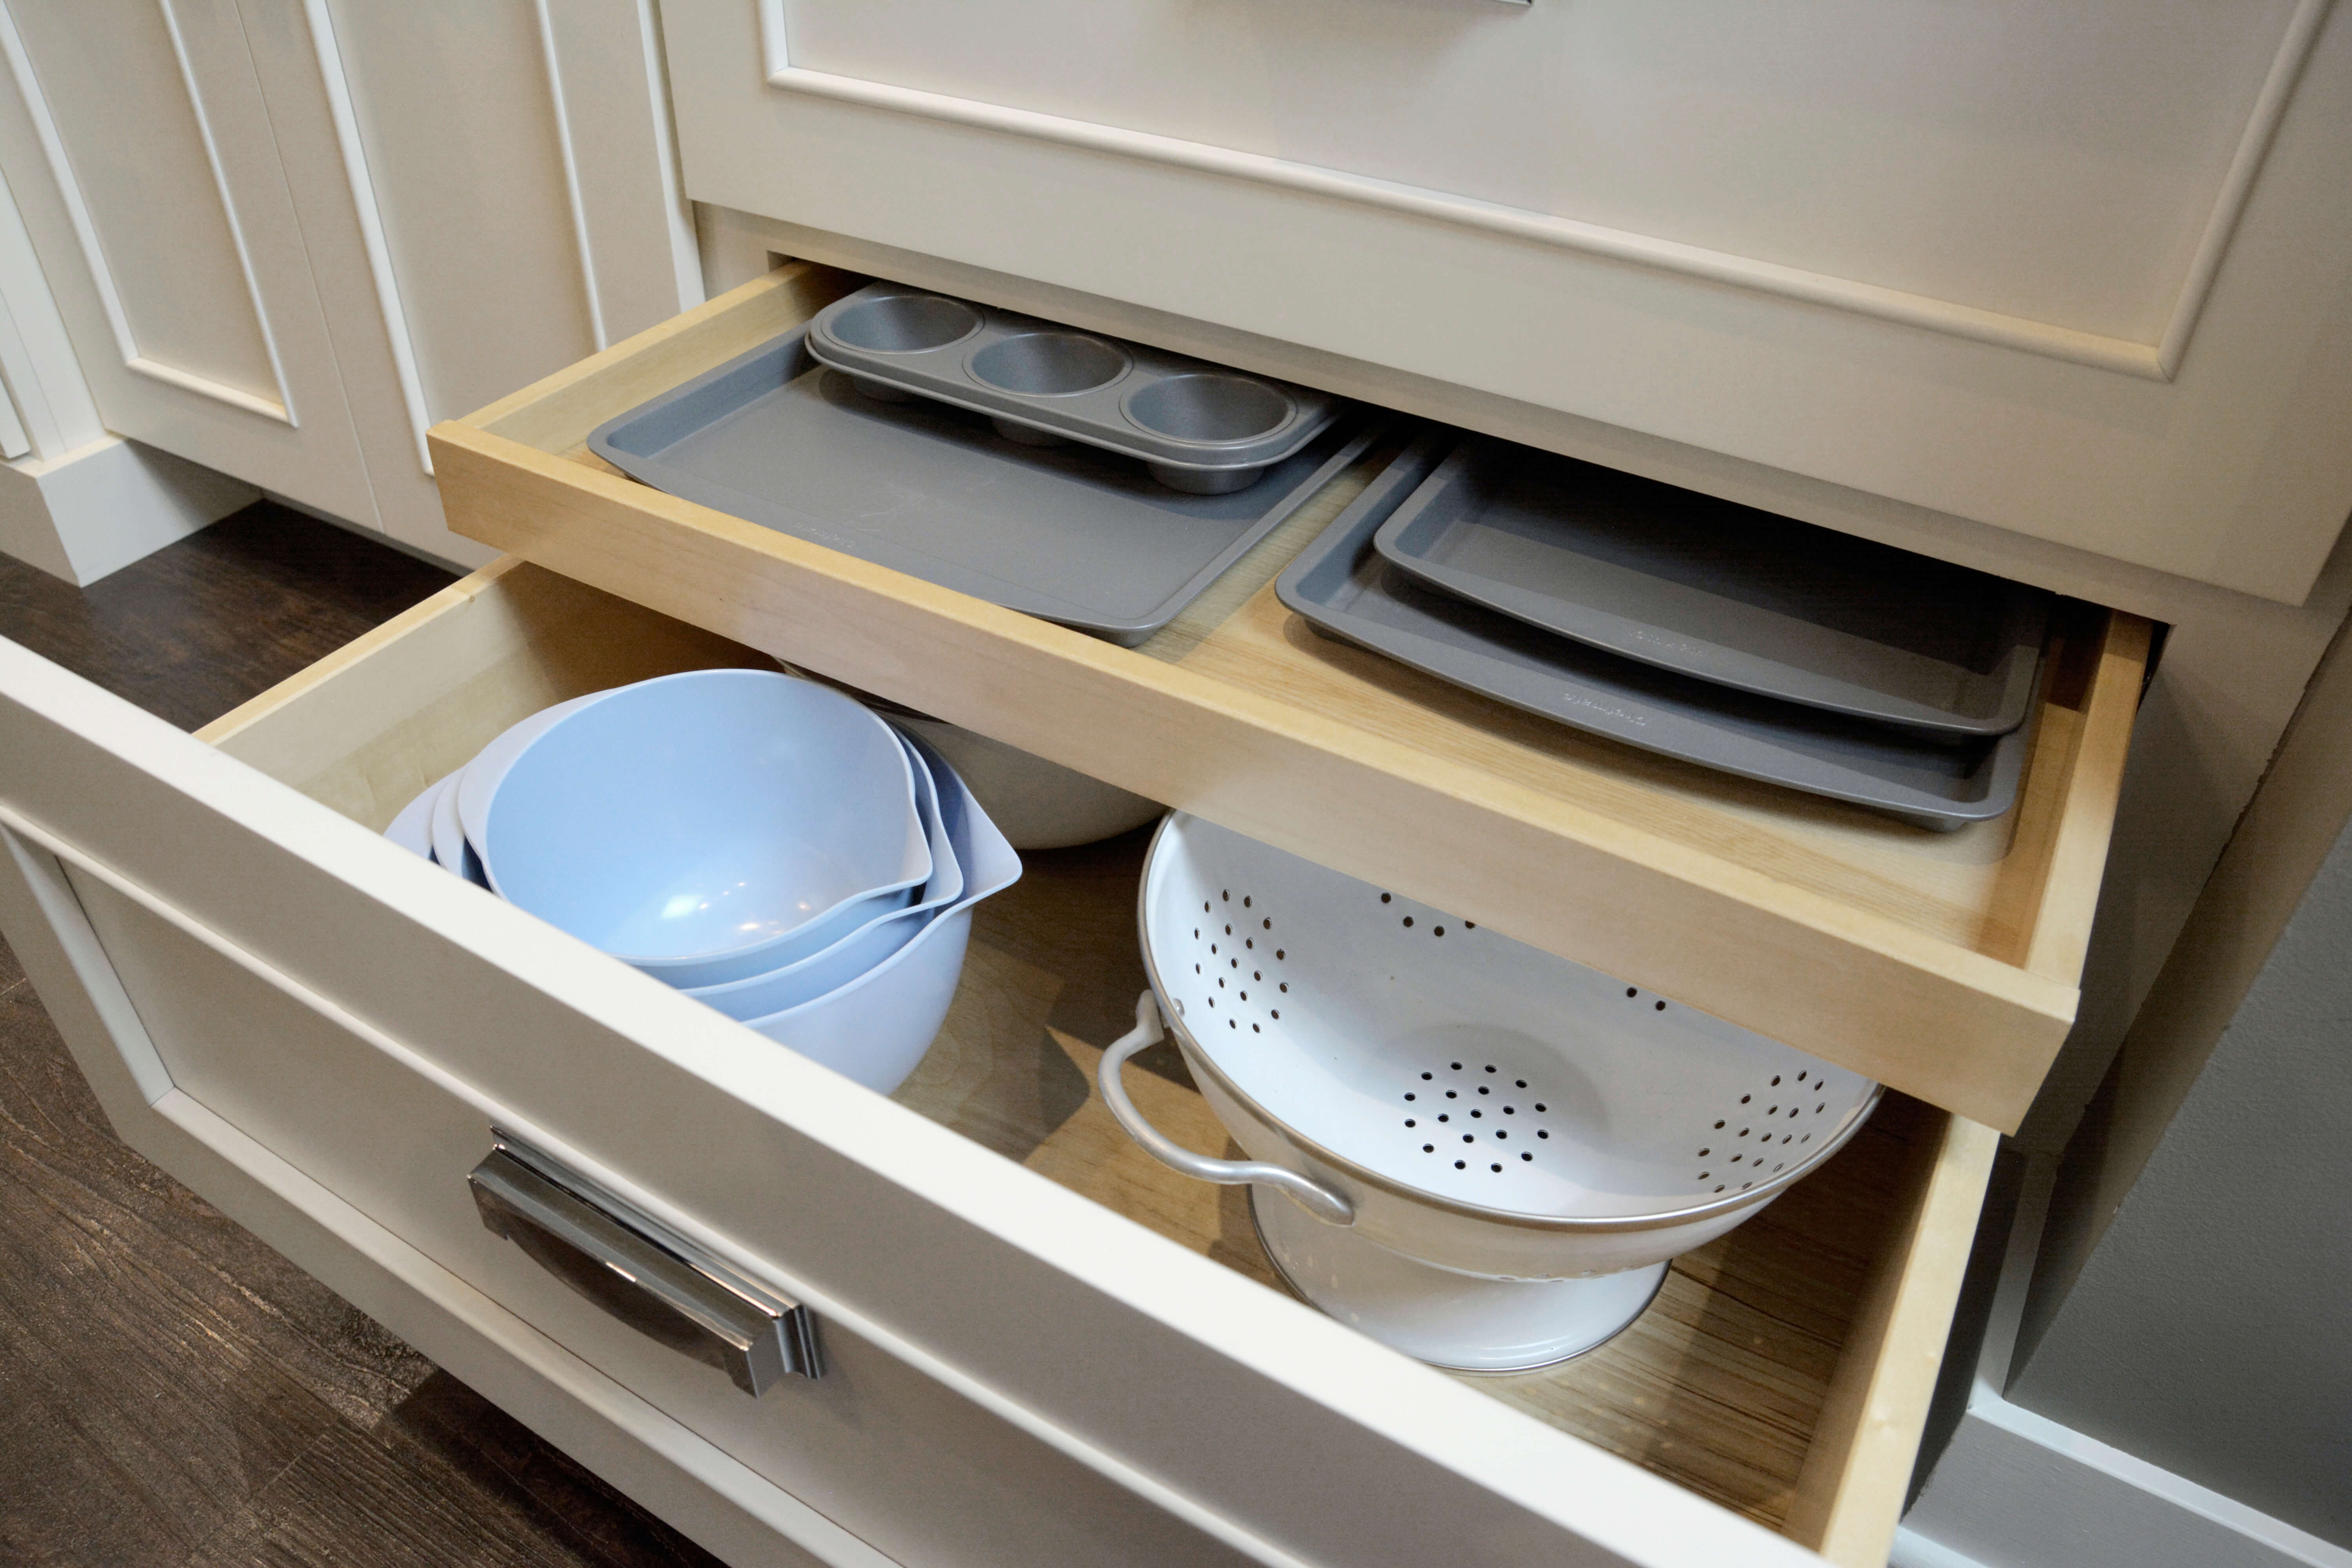 A roll-out above a deep drawer can help divide a drawer space and into two layers of storage. The top layer is perfect for muffin tins, baking trays, etc. while the lower part of the drawer can be used for strainers, mixing bowls or pots.